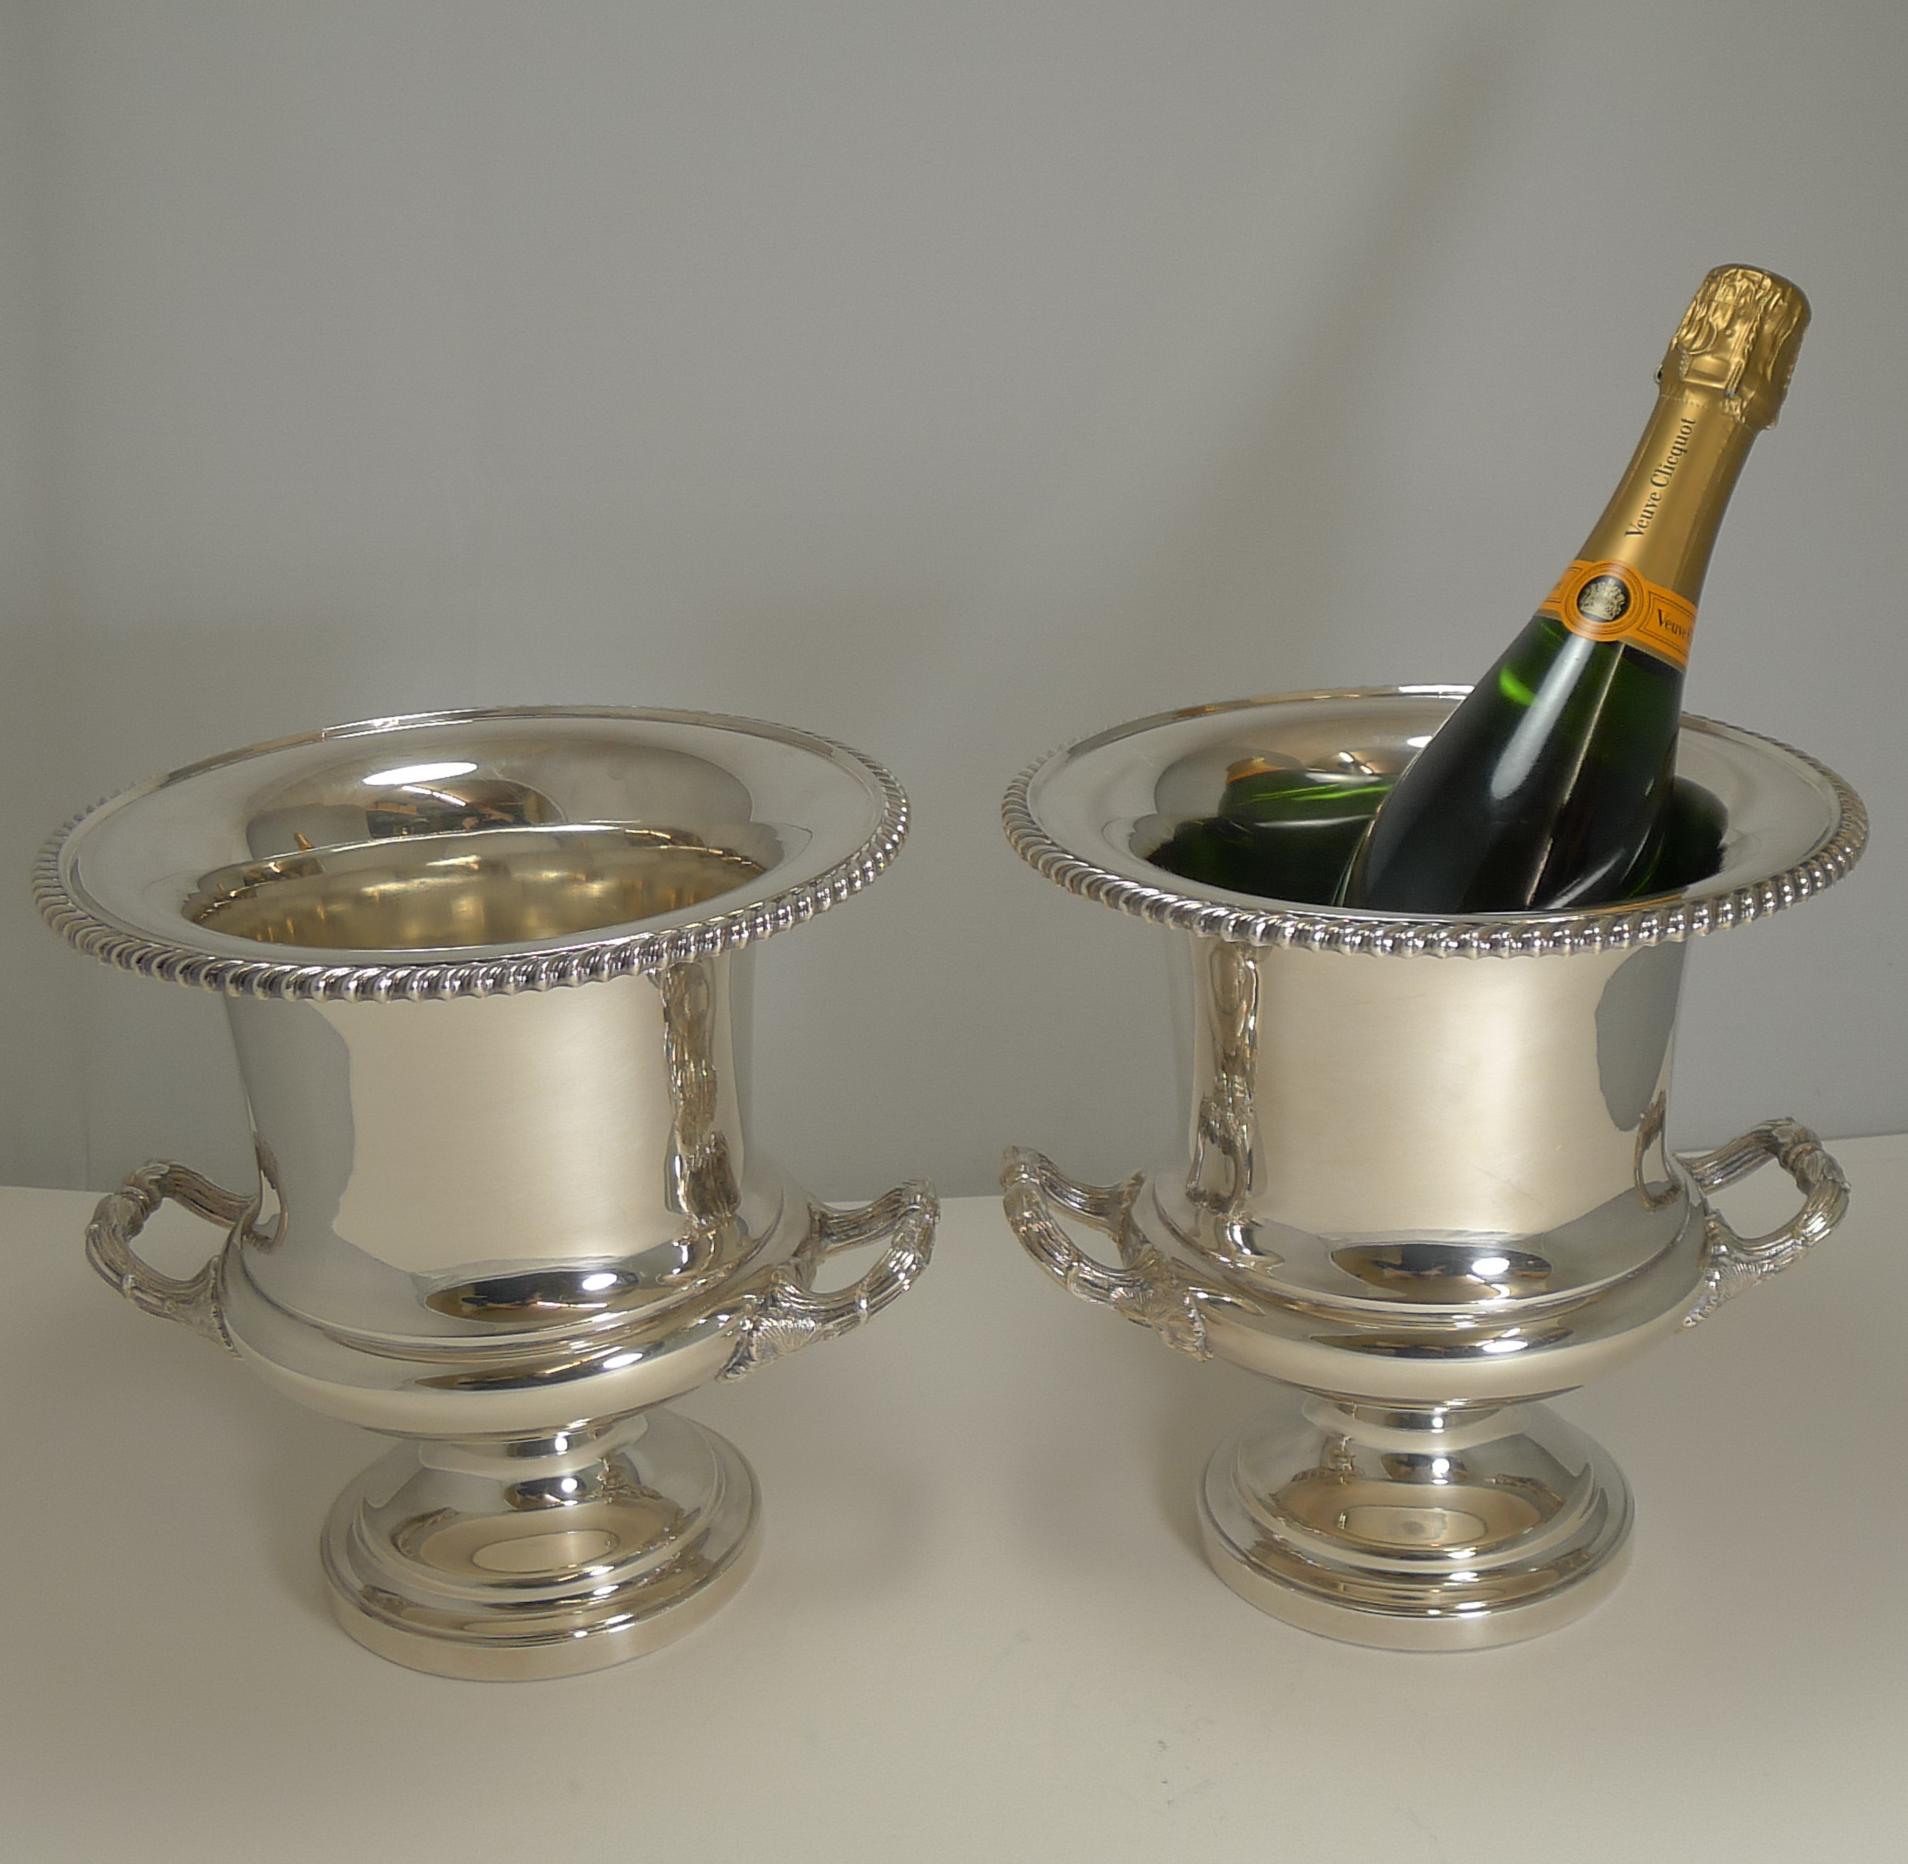 Pair of Antique English Silver Plated Wine or Champagne Coolers, circa 1910-1920 1